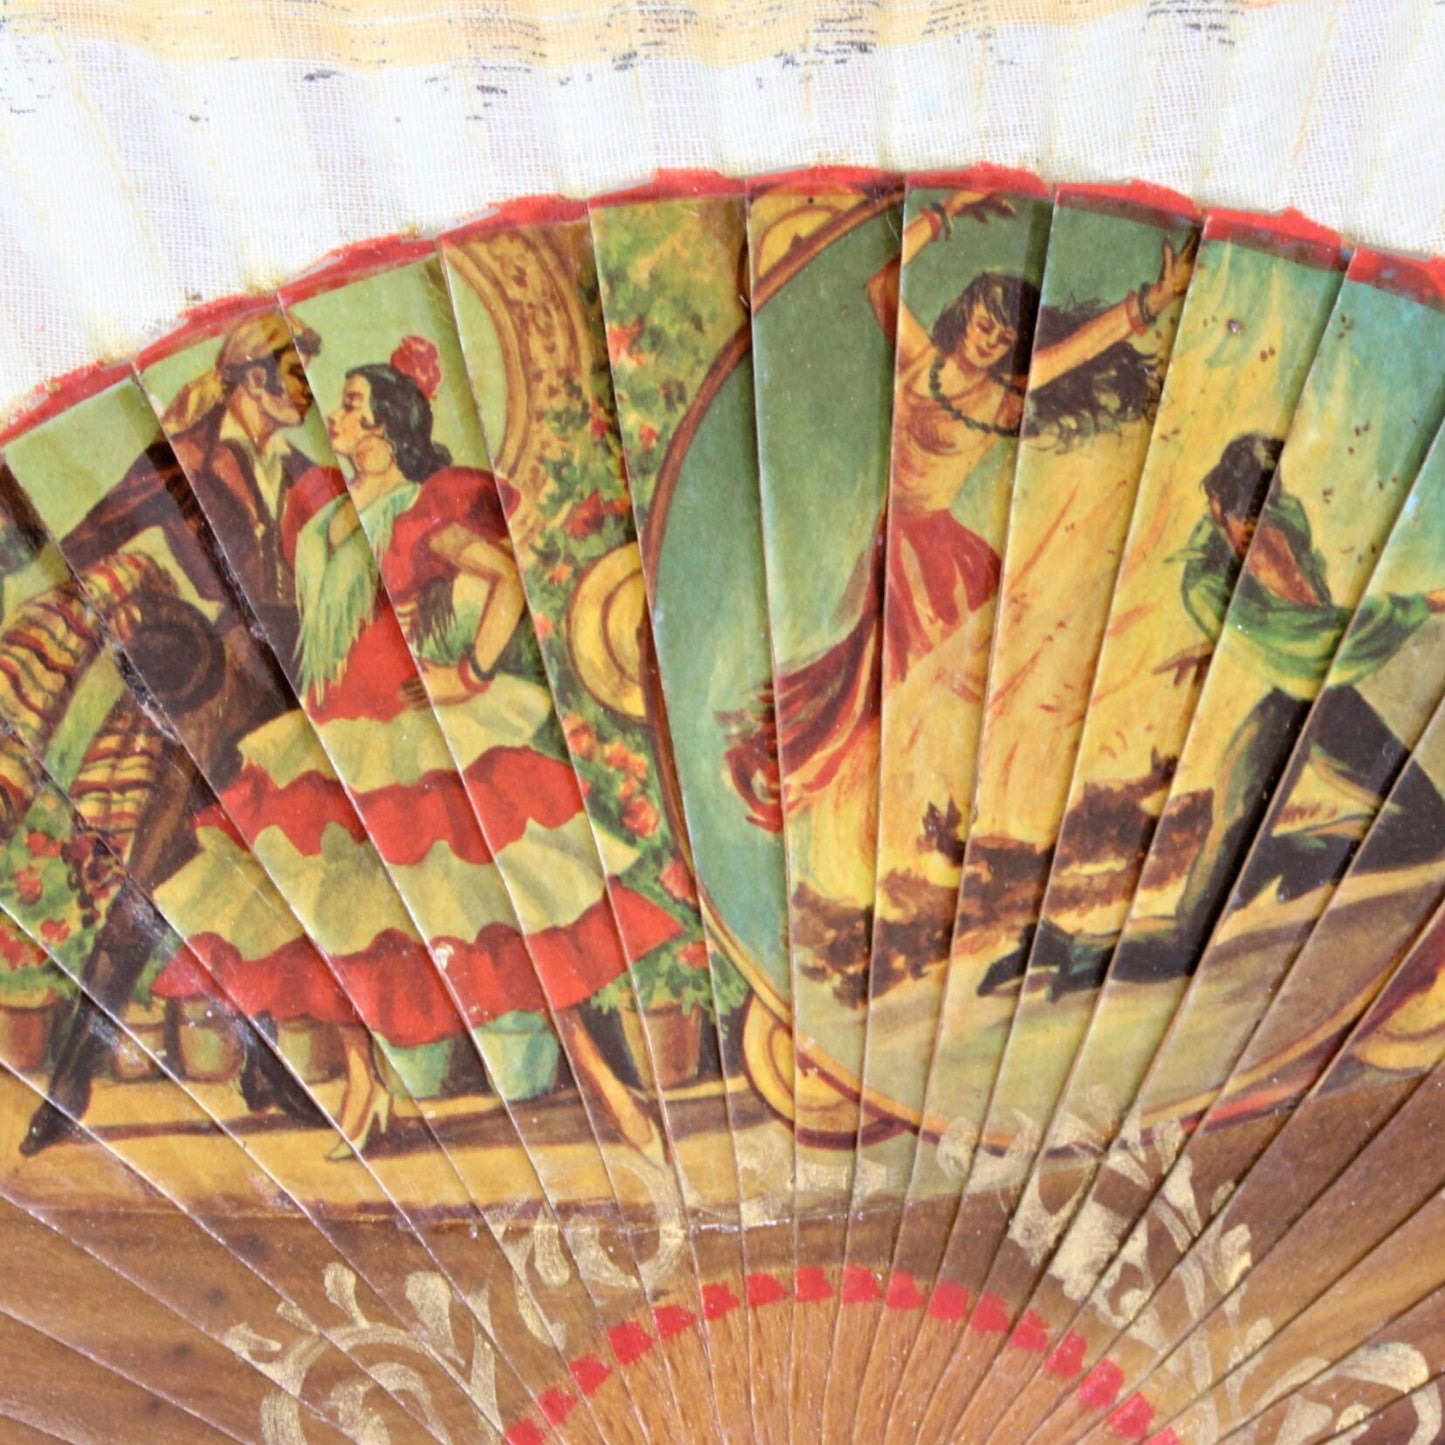 Hand Fan, Spanish Style, Flamenco Dancers / Bull Fighters, Hand Painted Wood, Vintage